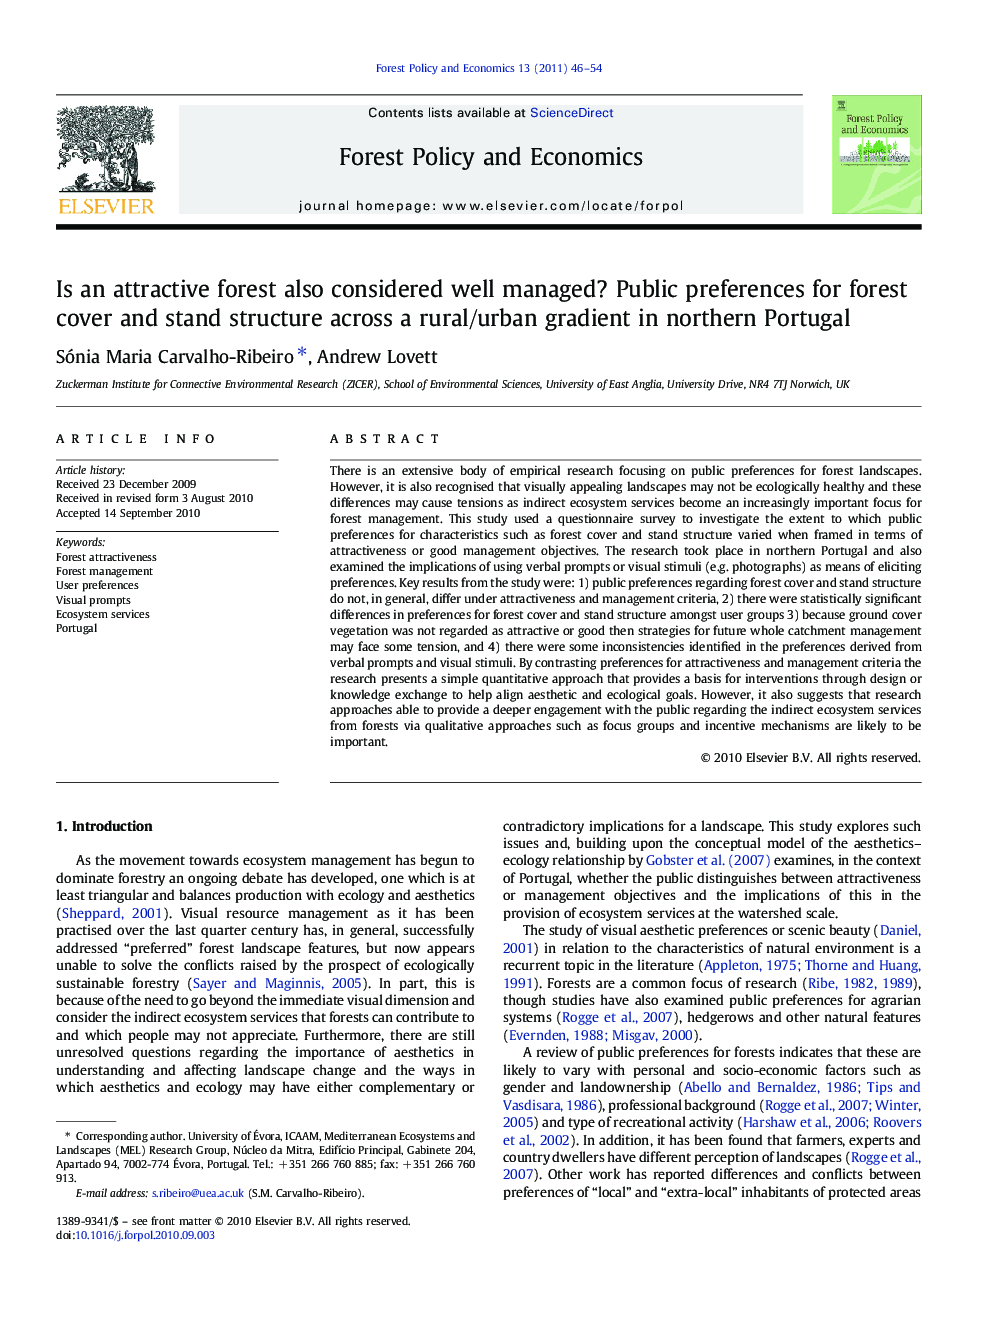 Is an attractive forest also considered well managed? Public preferences for forest cover and stand structure across a rural/urban gradient in northern Portugal